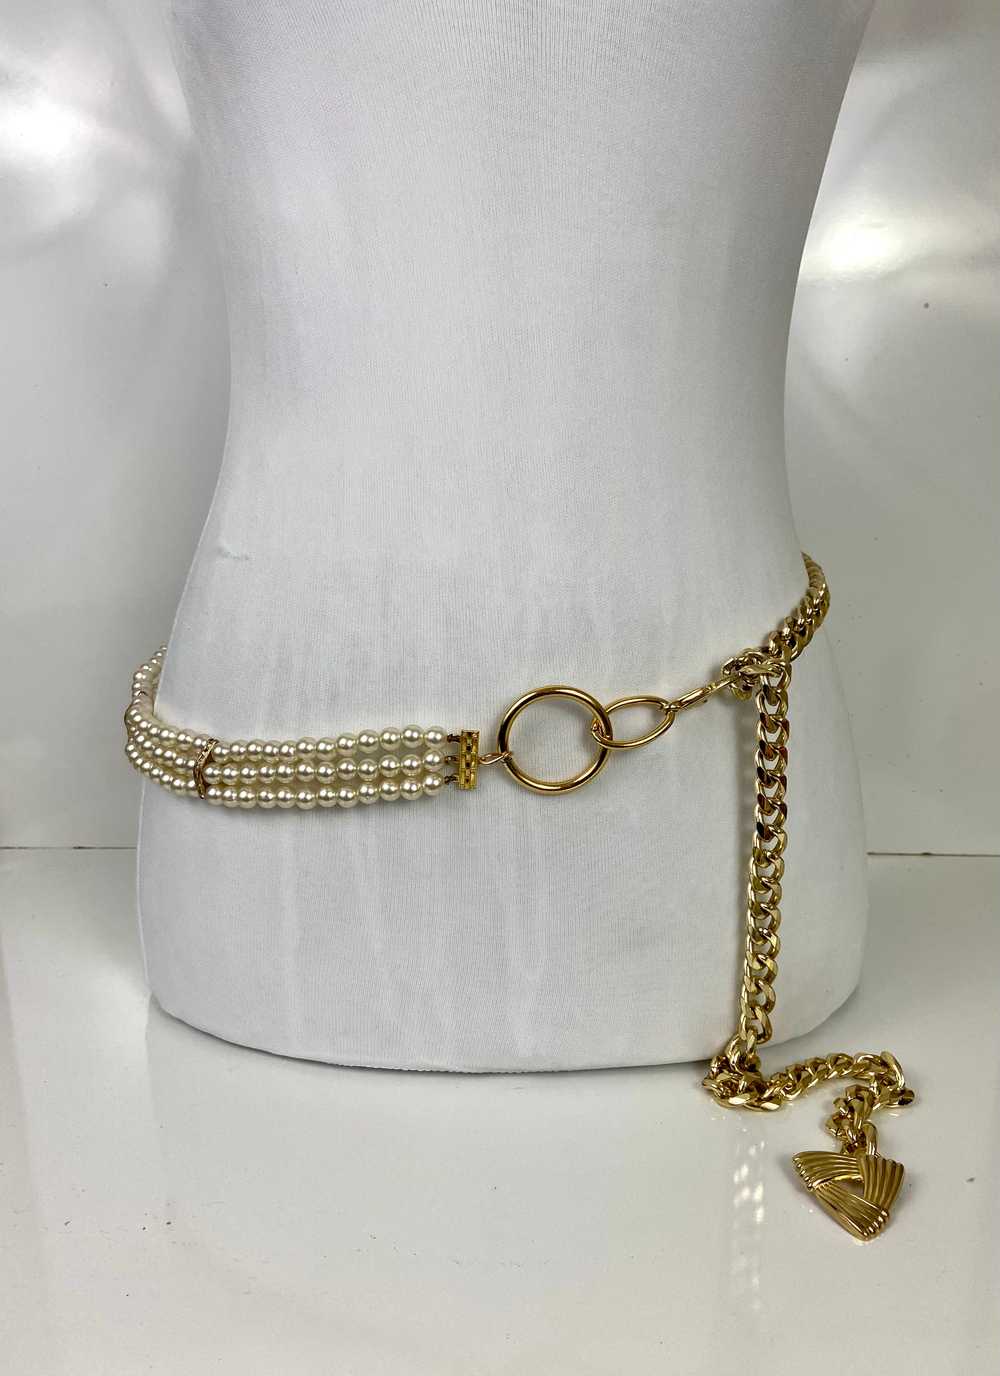 Pearl and gold belt - image 4